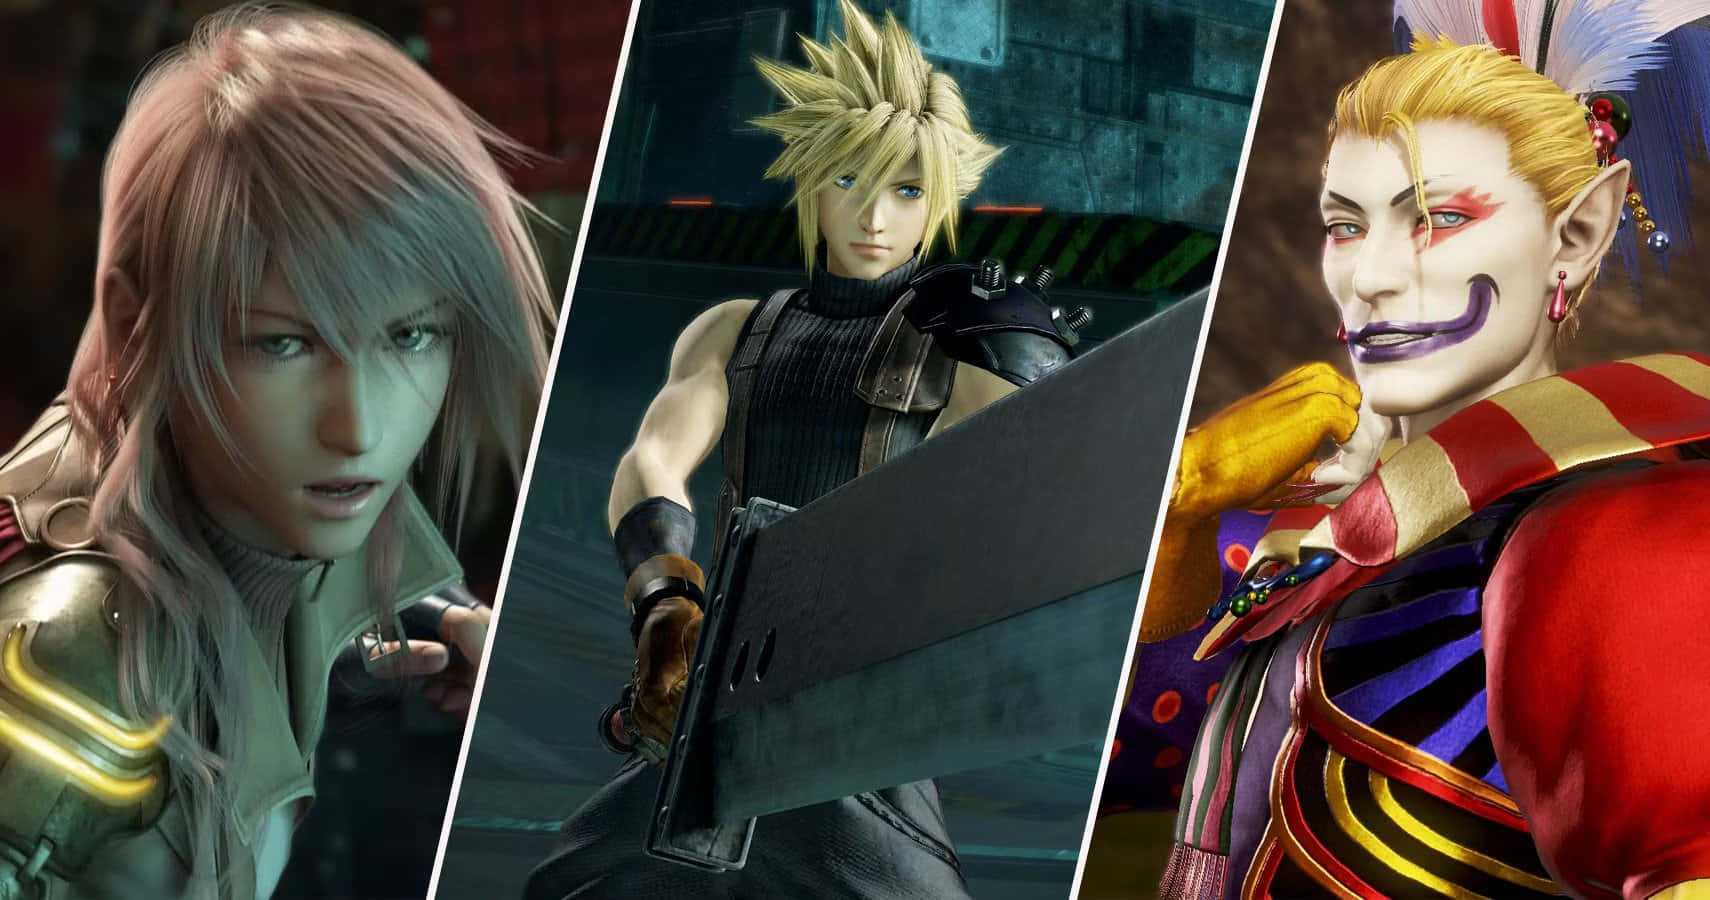 Caption: Enthralling Final Fantasy characters ready for action Wallpaper